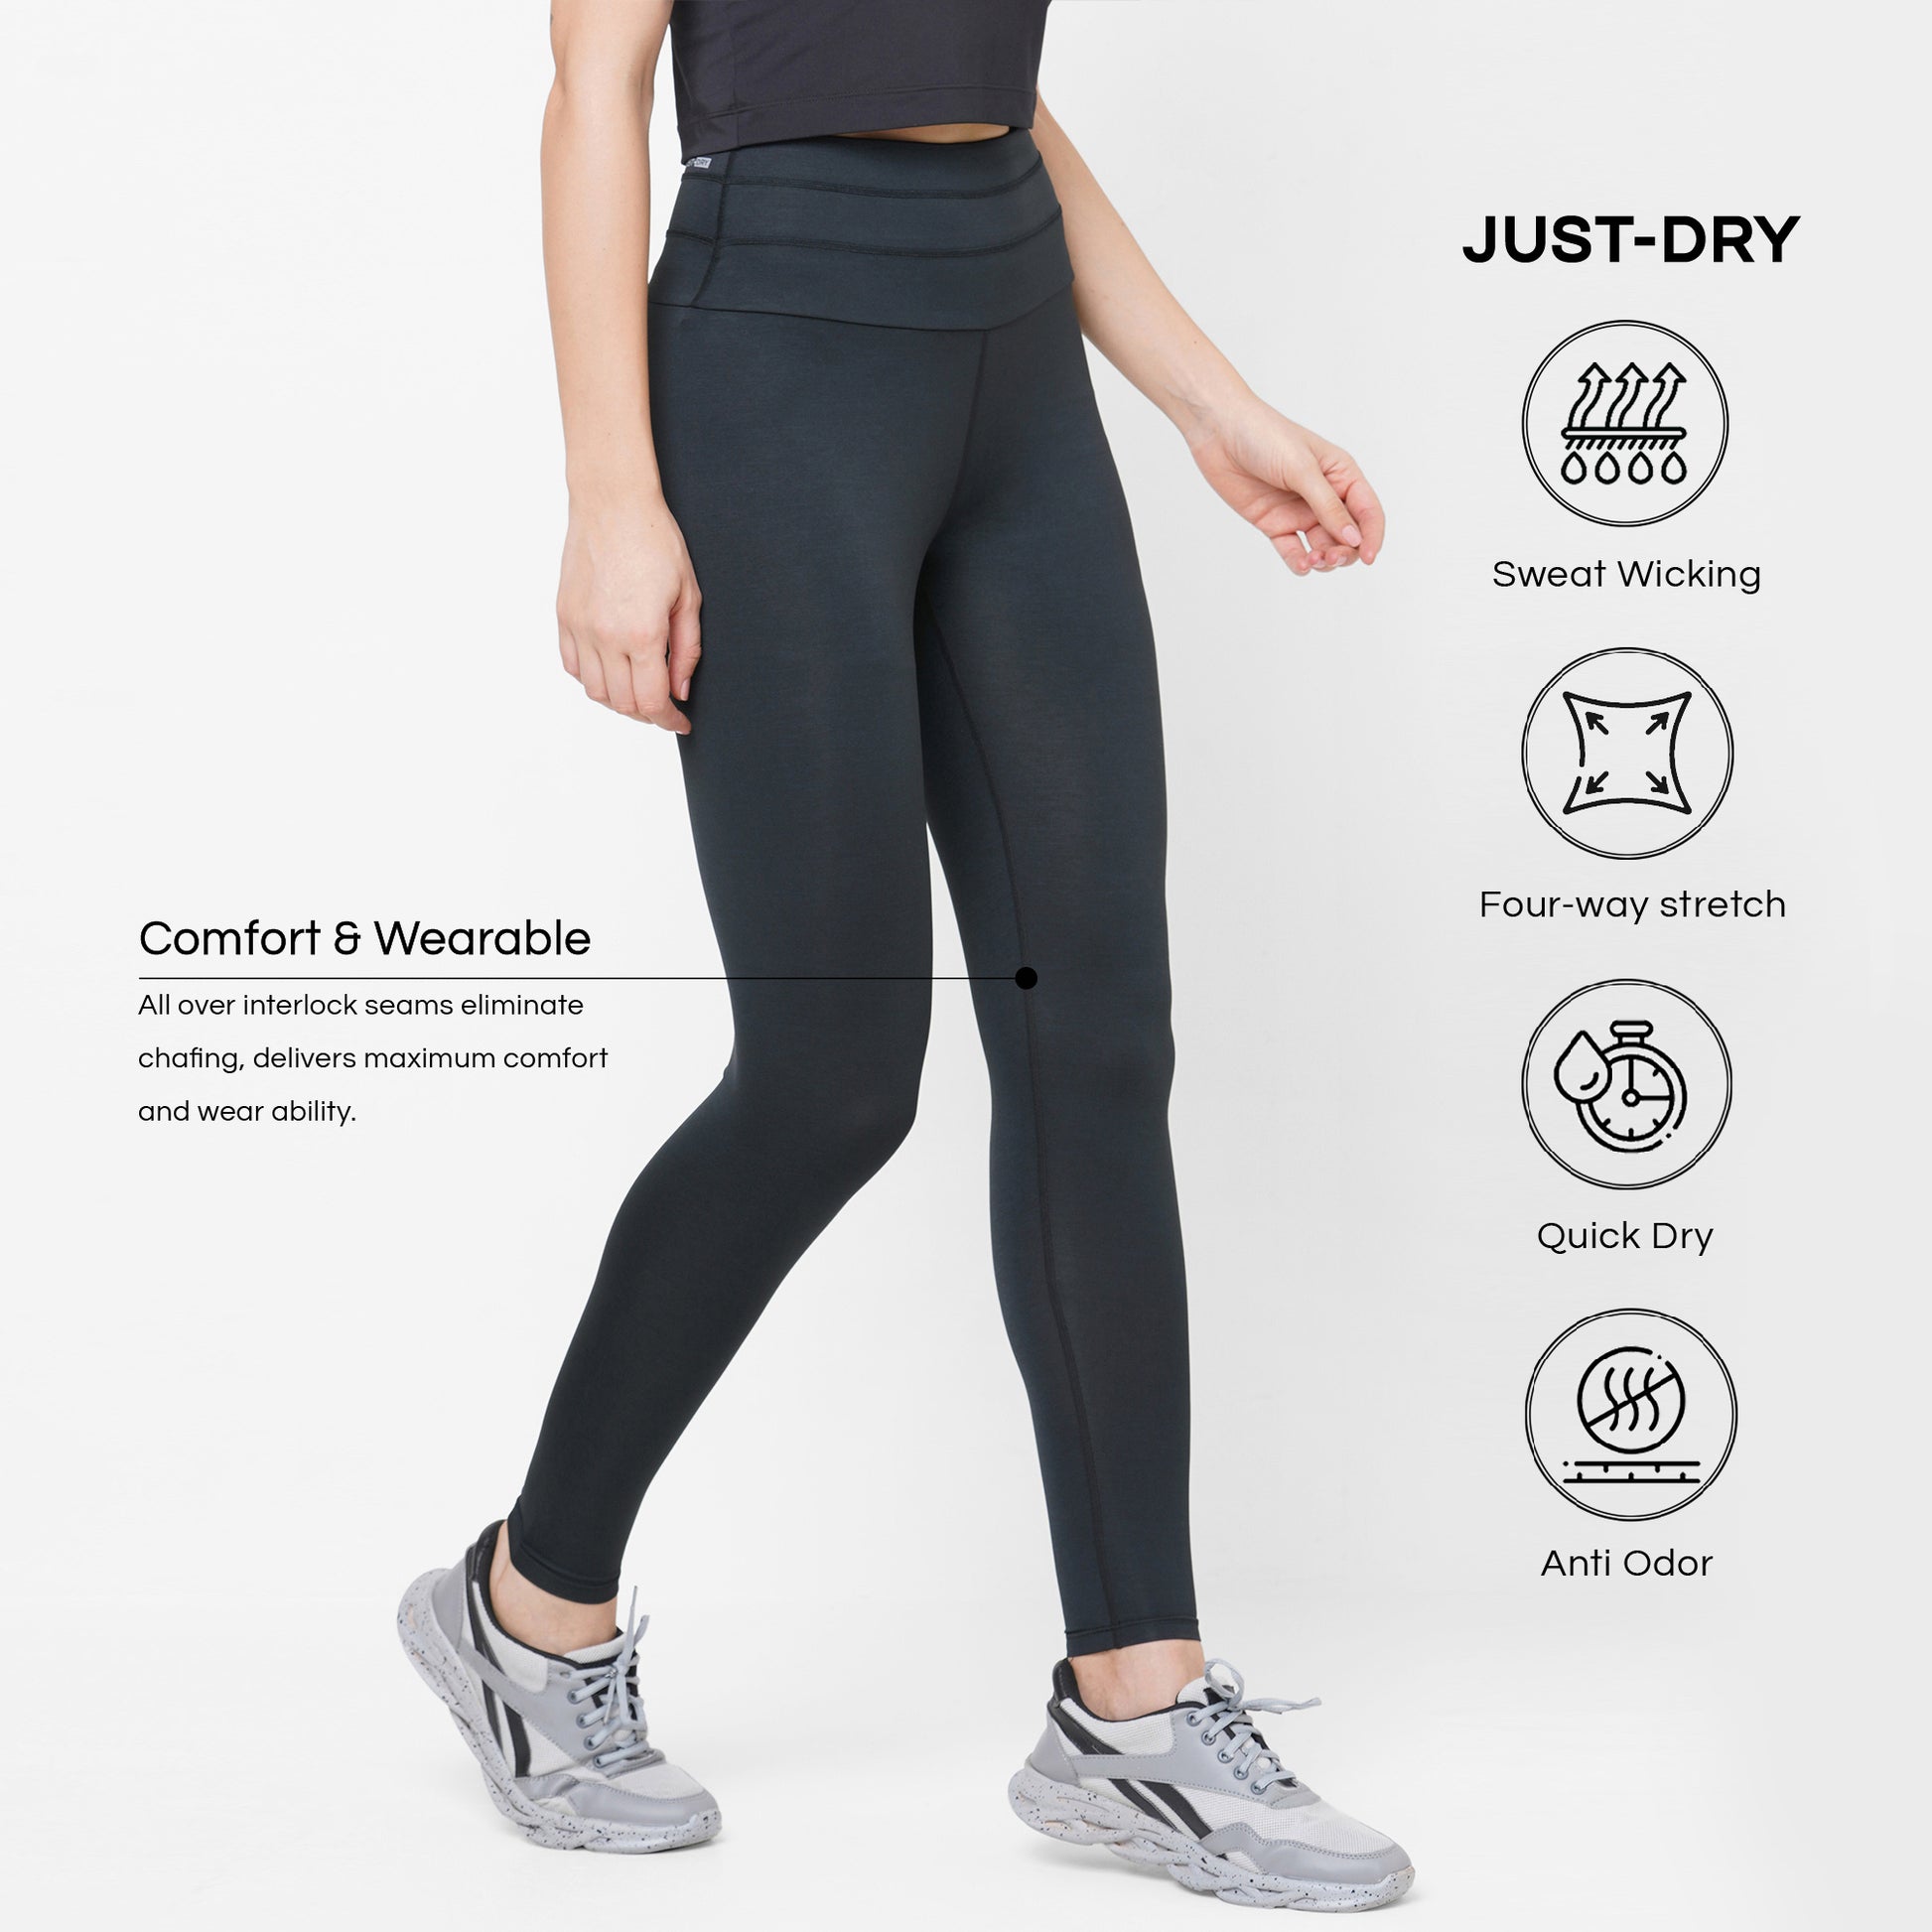 Gray women's leggings with Just Do It print